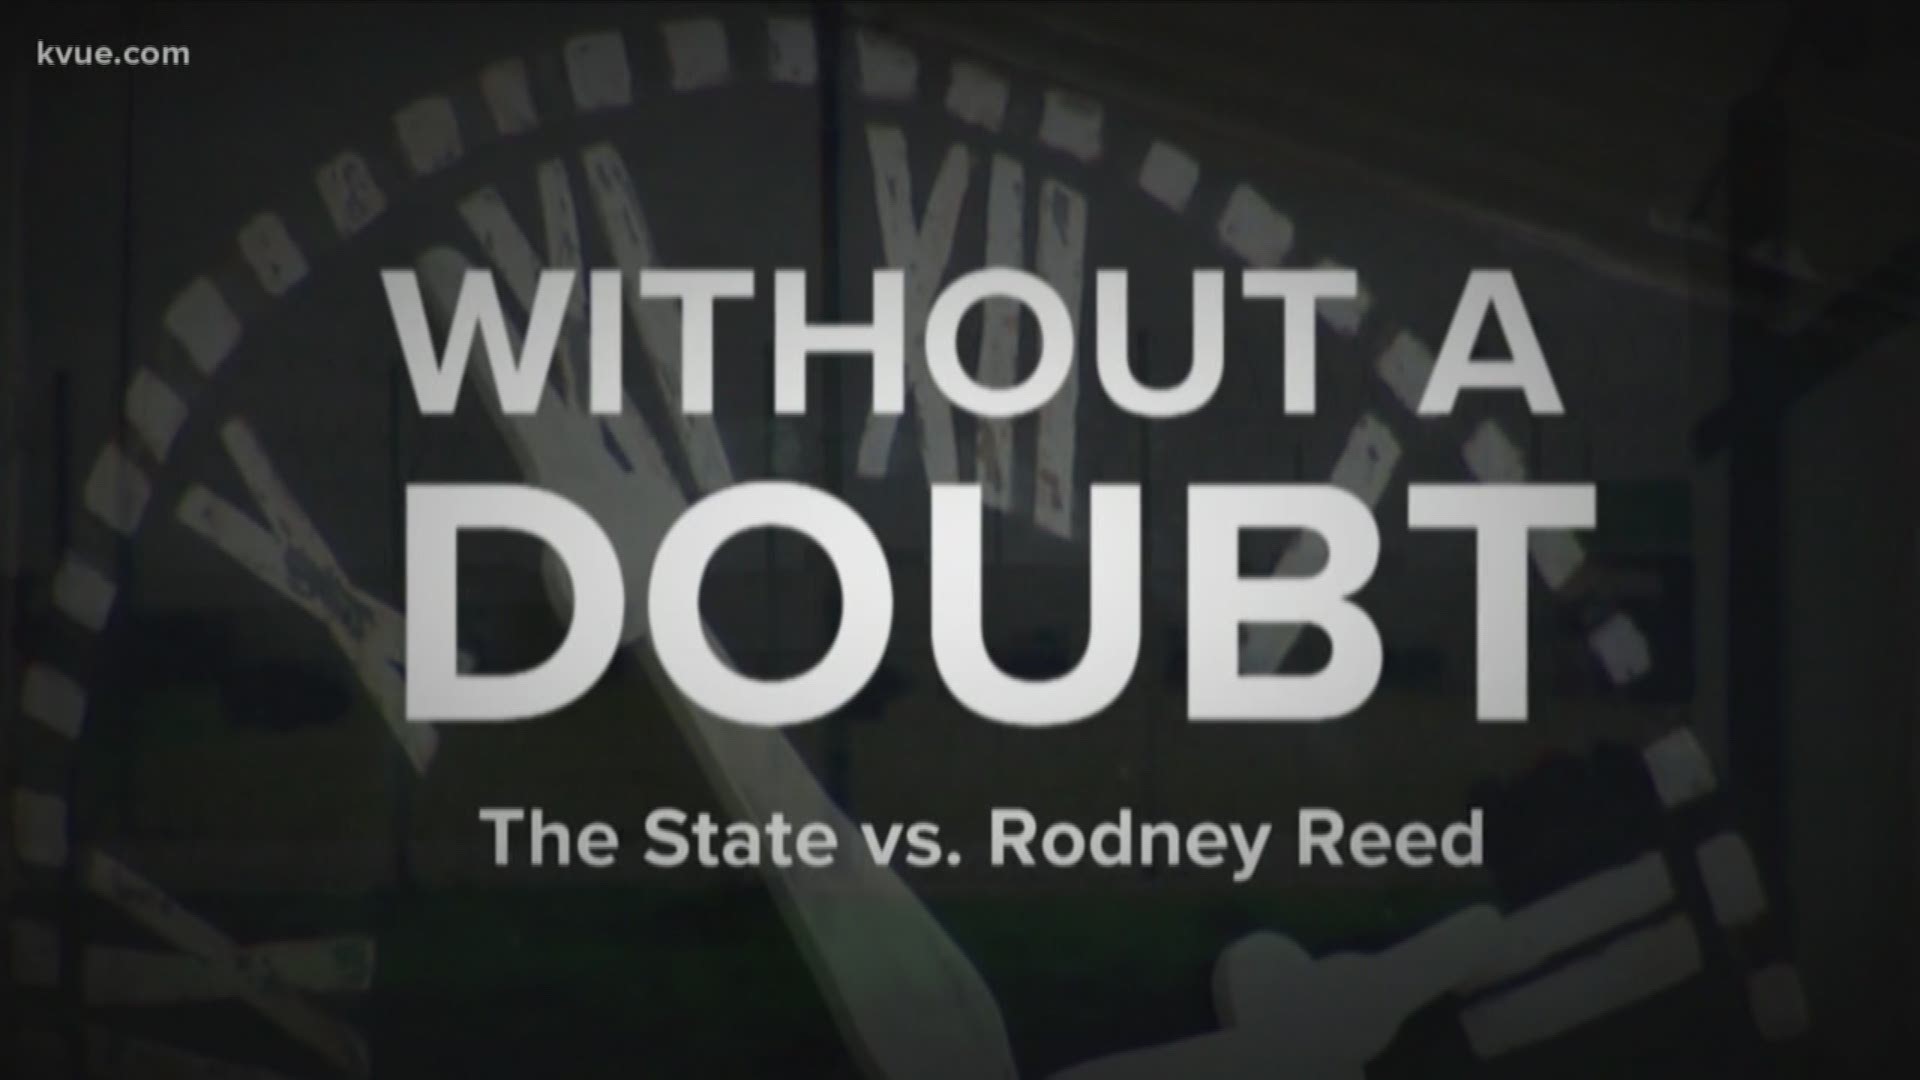 Rodney Reed is scheduled to be executed Nov. 20. Supporters say facts have been ignored, while the State stands by its verdict. We took an in-depth look at the case.